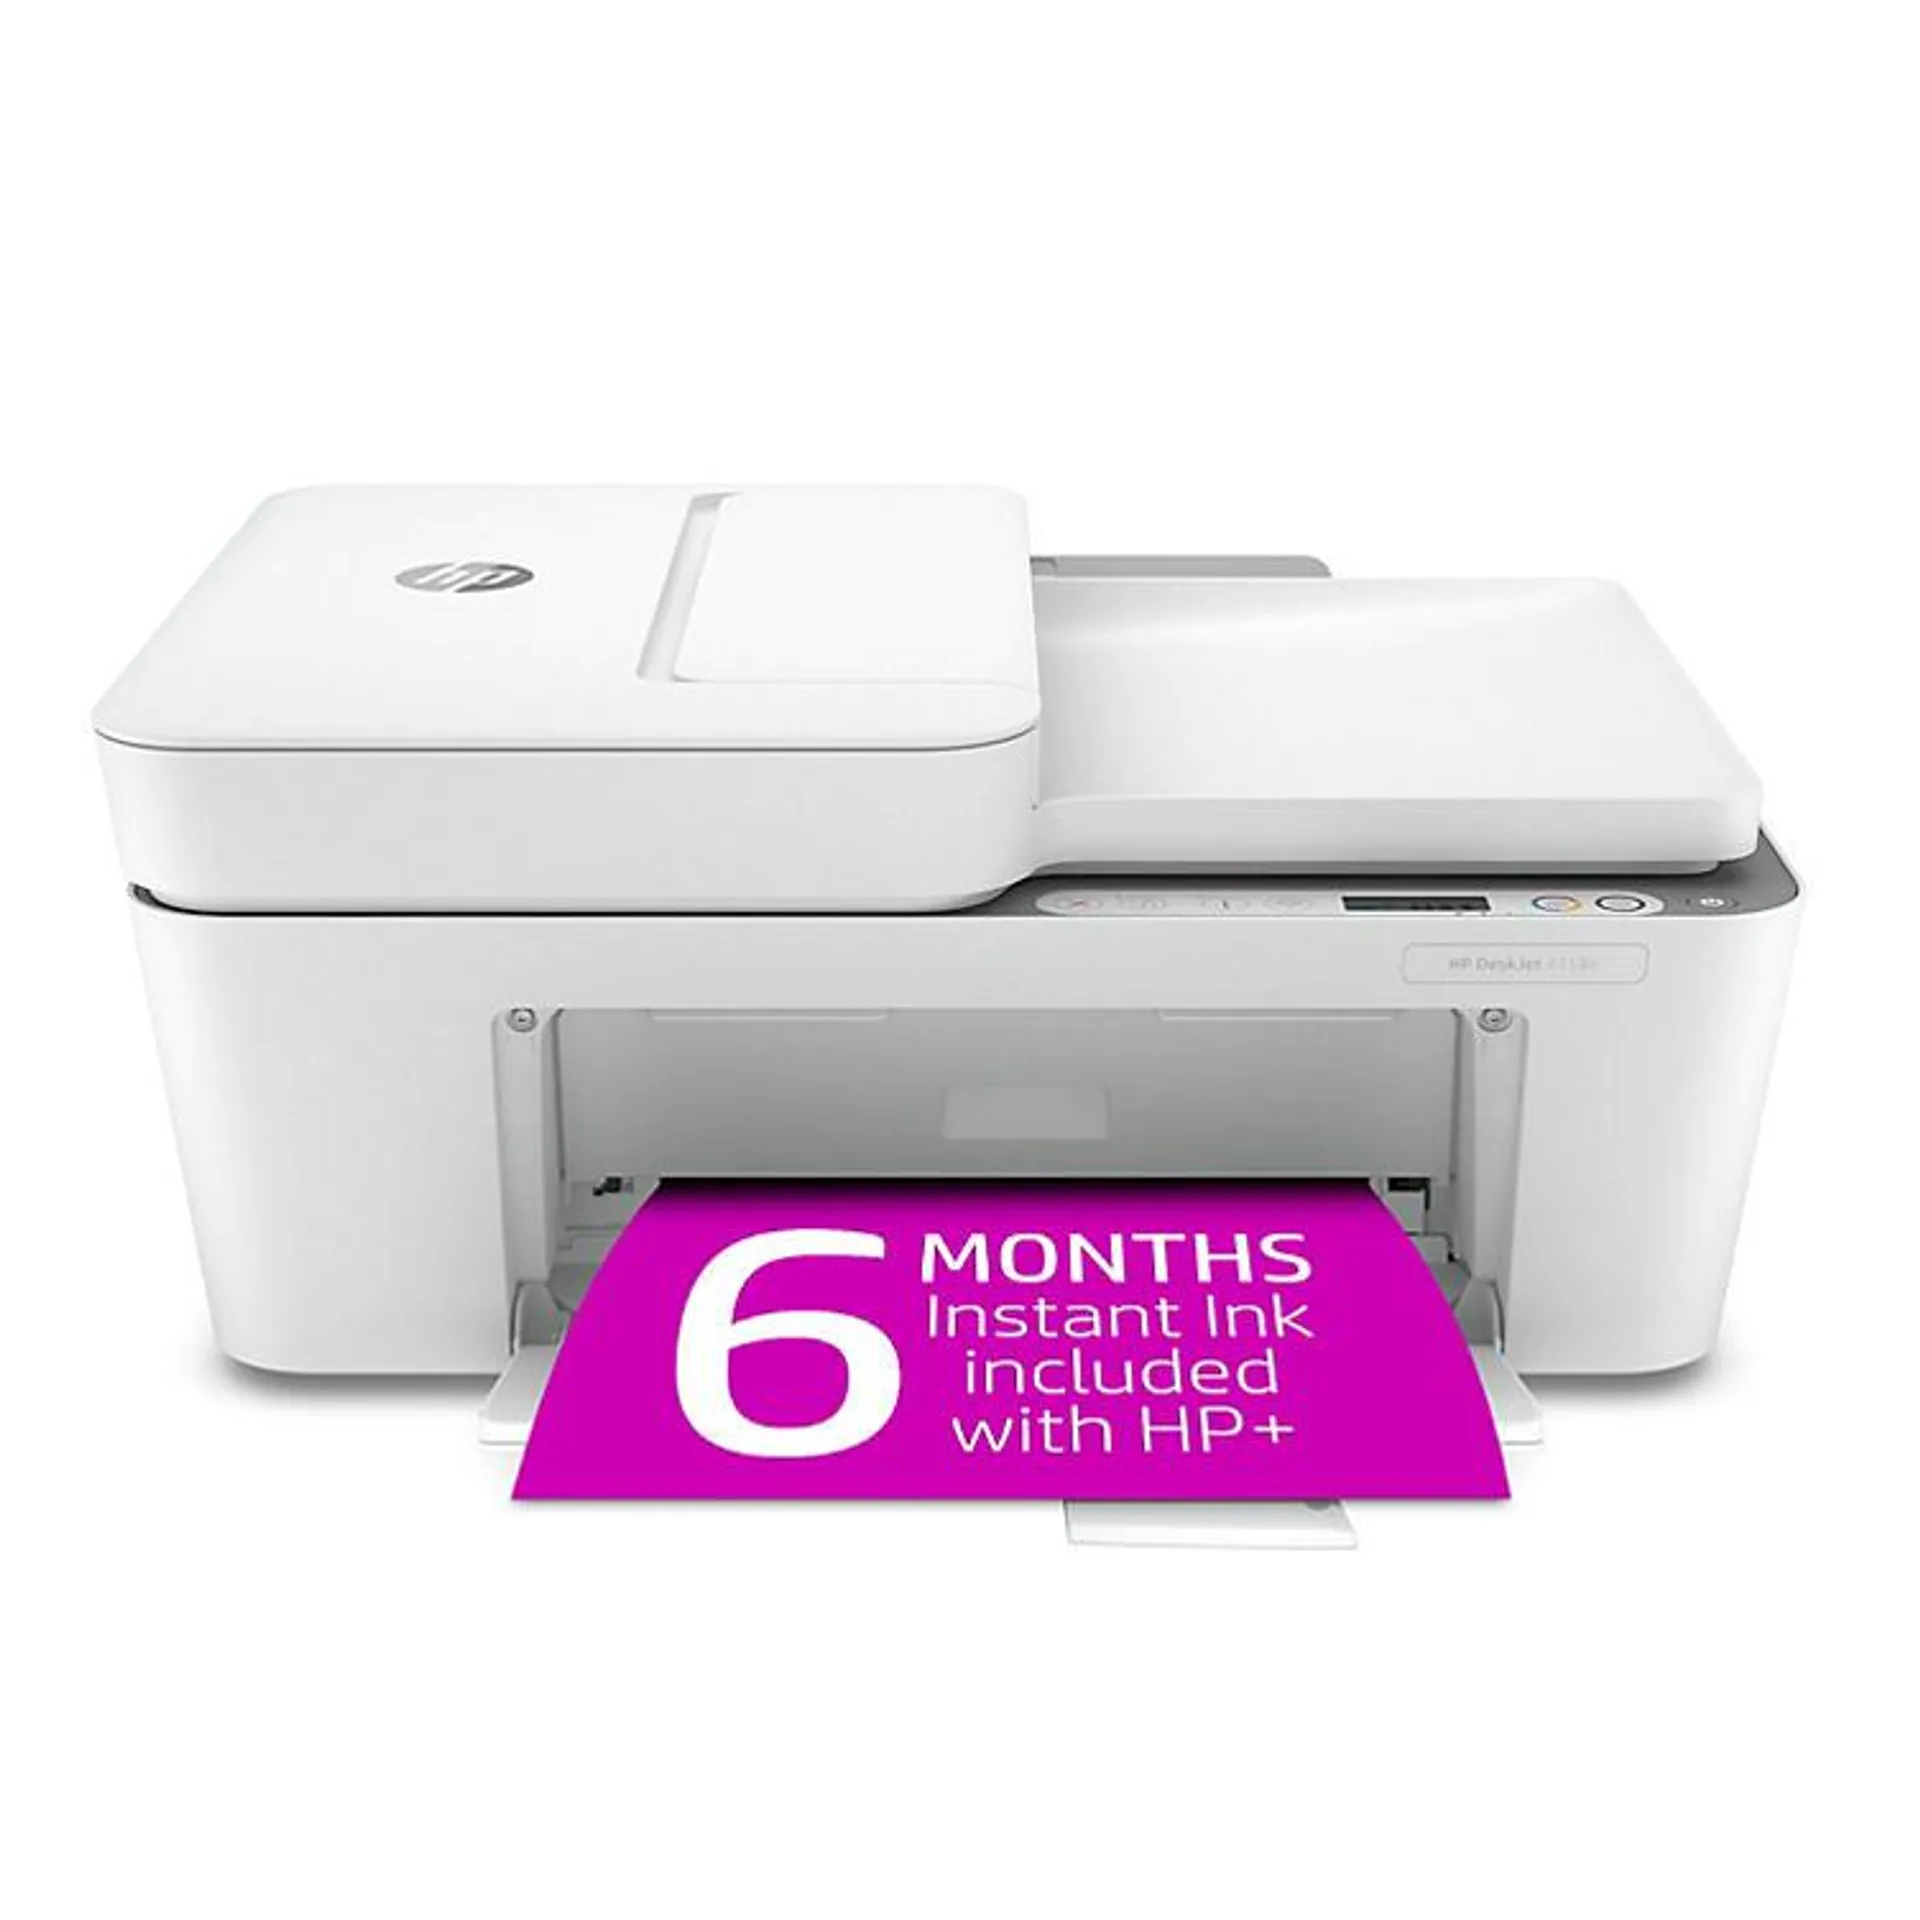 HP DeskJet 4158e All-in-One Wireless Color Inkjet Printer – 6 months free Instant Ink with HP+